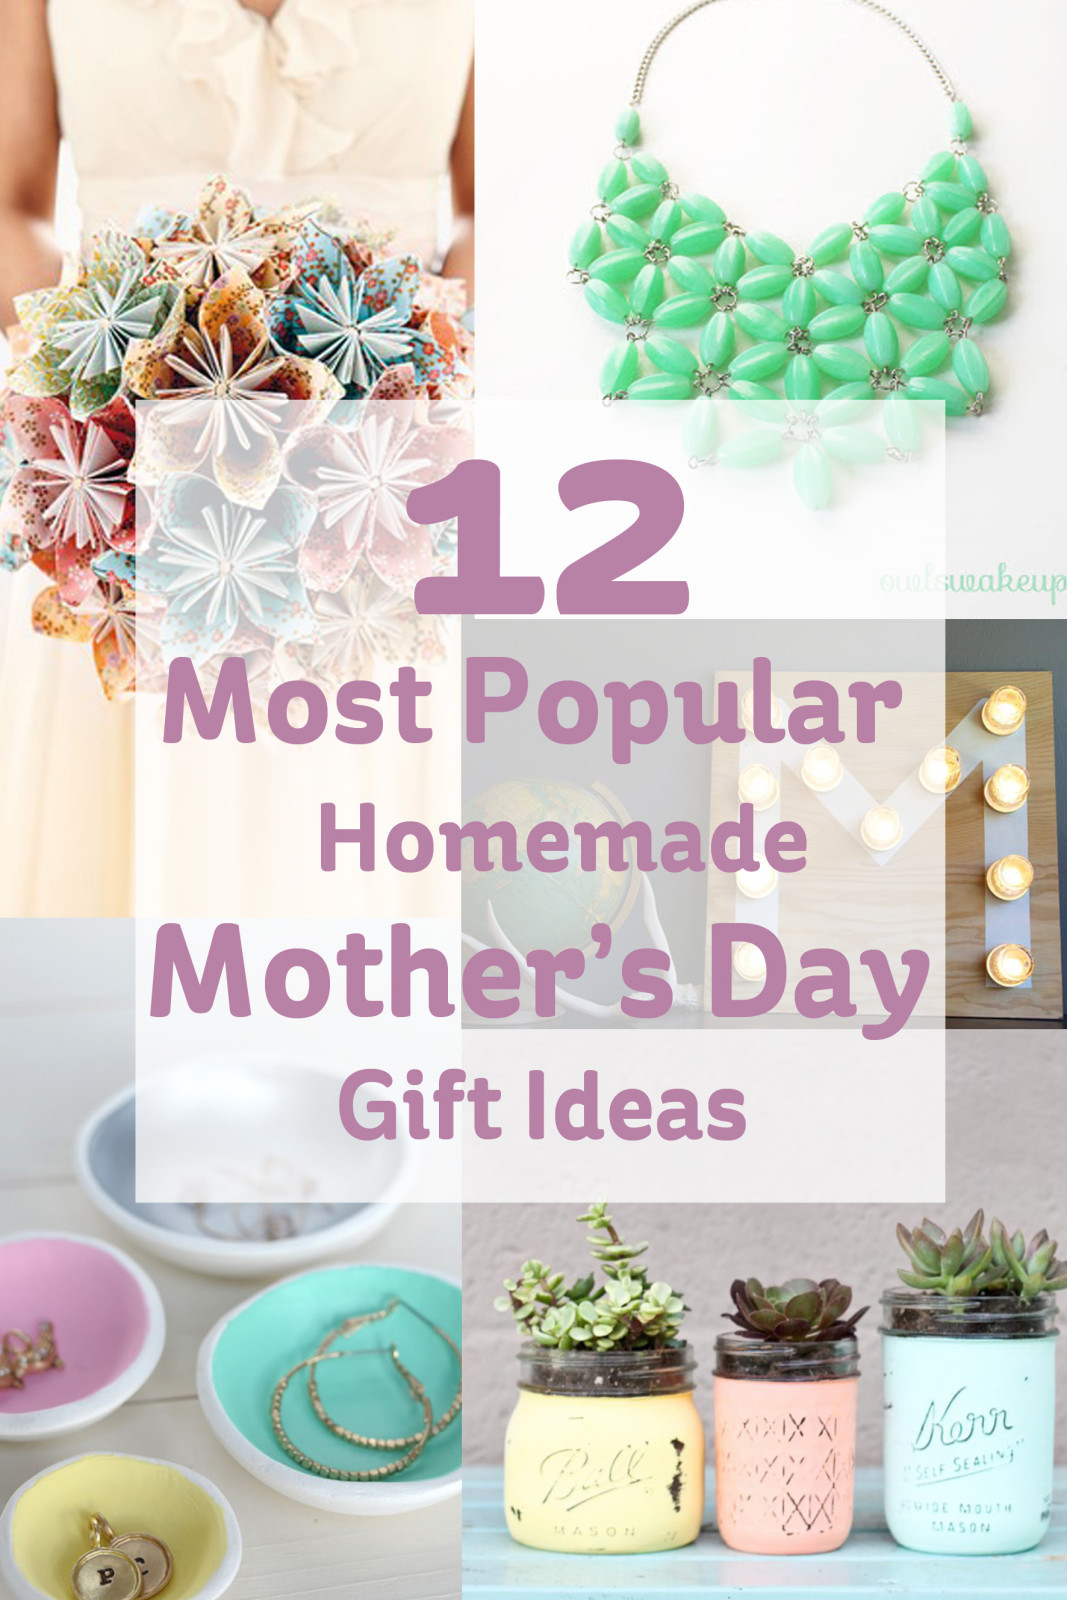 Mother'S Day Gift Ideas Homemade
 12 Most Popular Homemade Mother s Day Gift Ideas